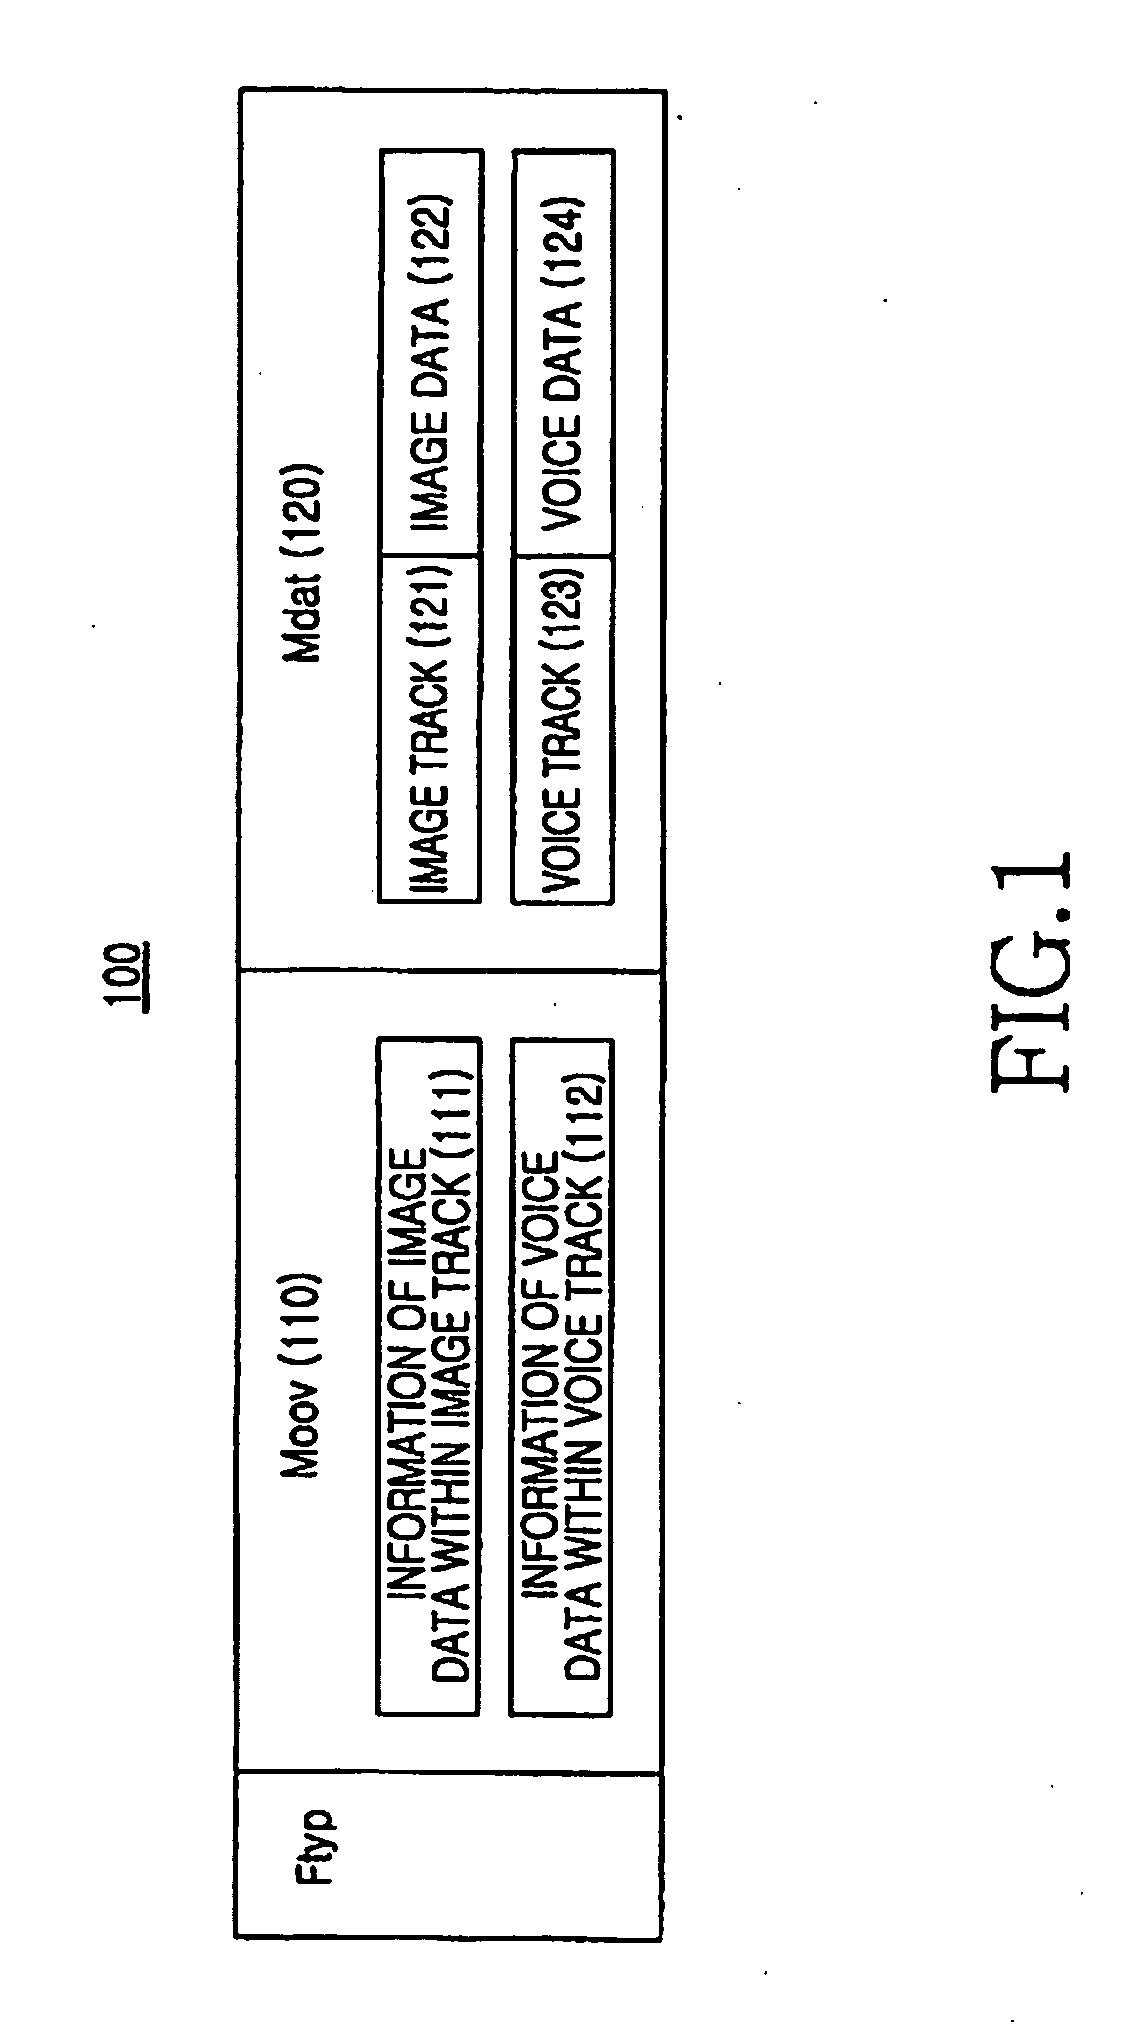 System and method for generating and reproducing 3D stereoscopic image file including 2d image